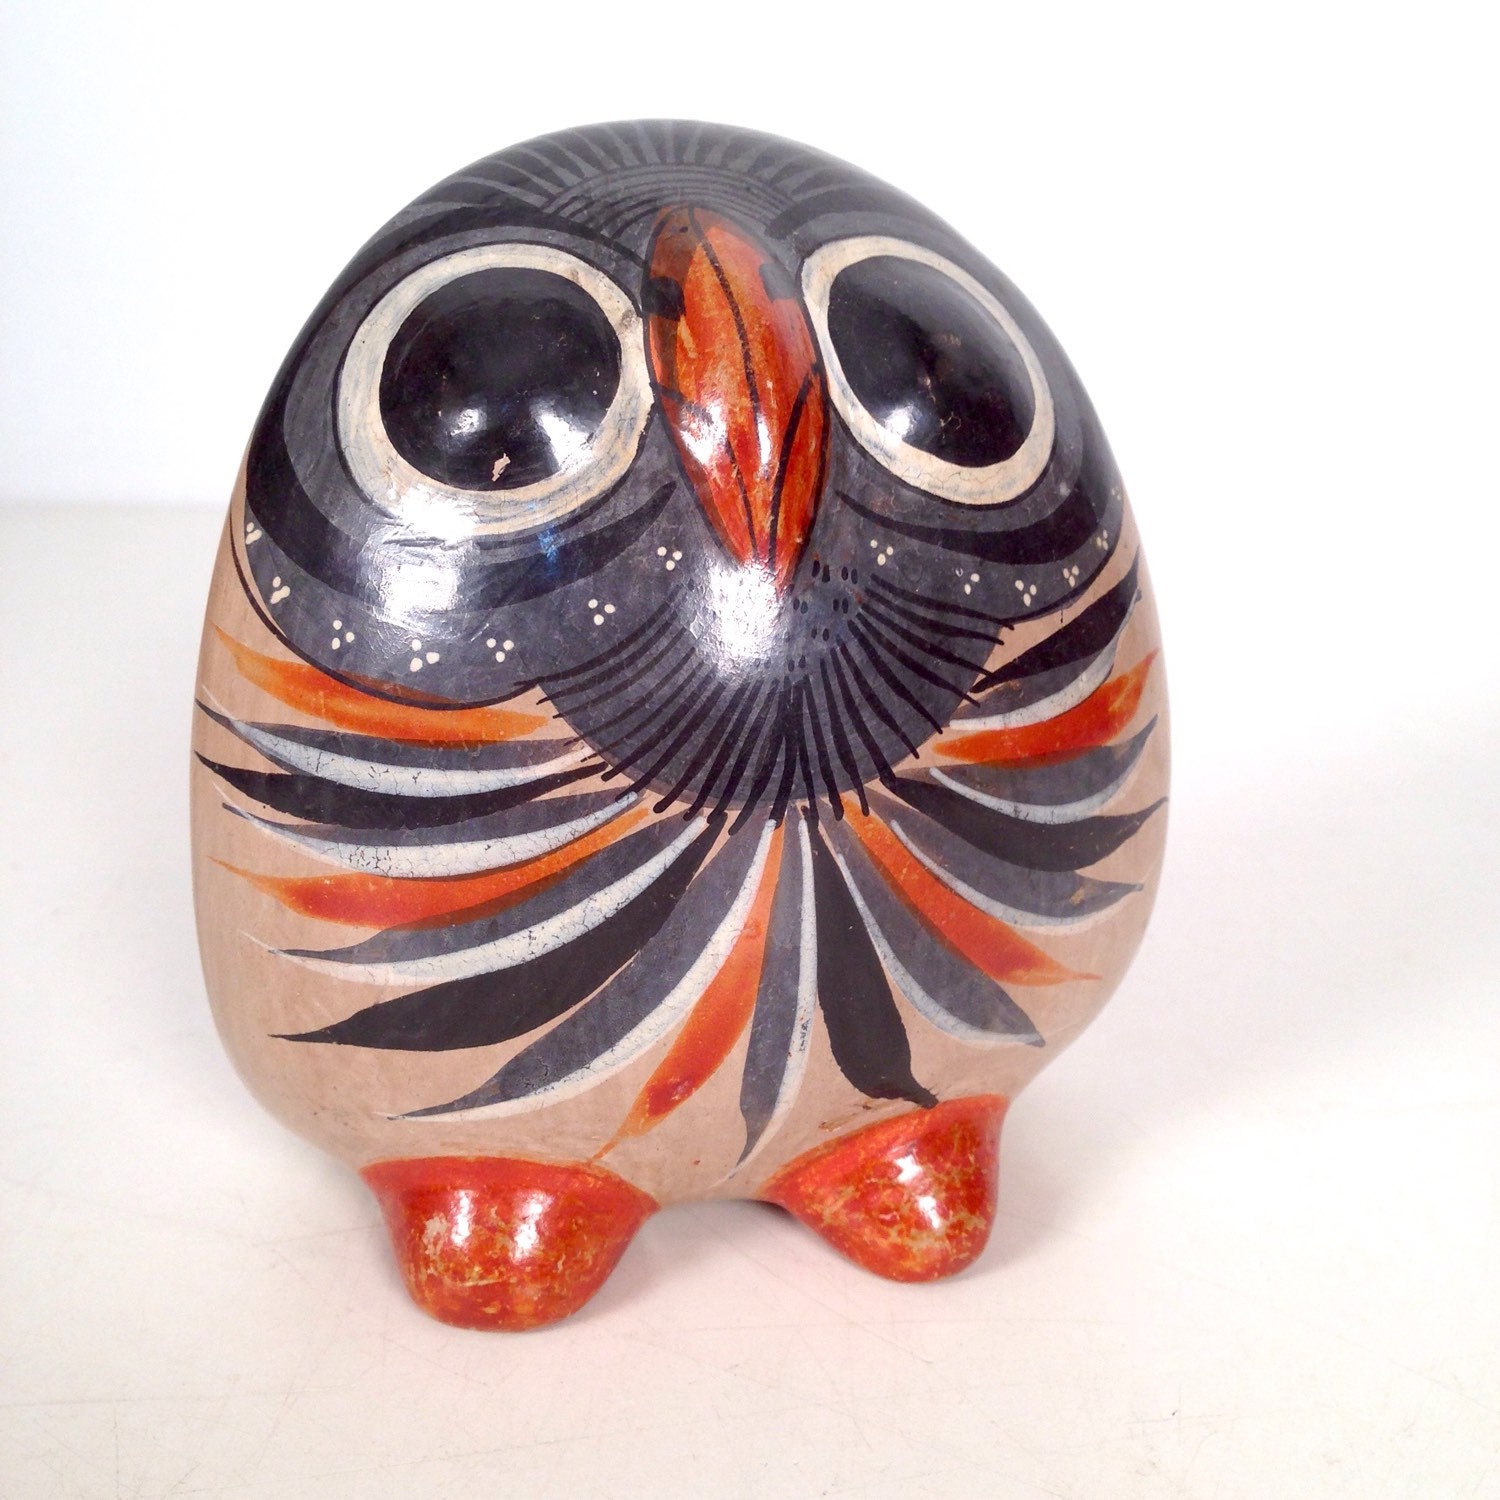 vintage sculpture Mexican pottery owl by ninedoorsvintage on Etsy